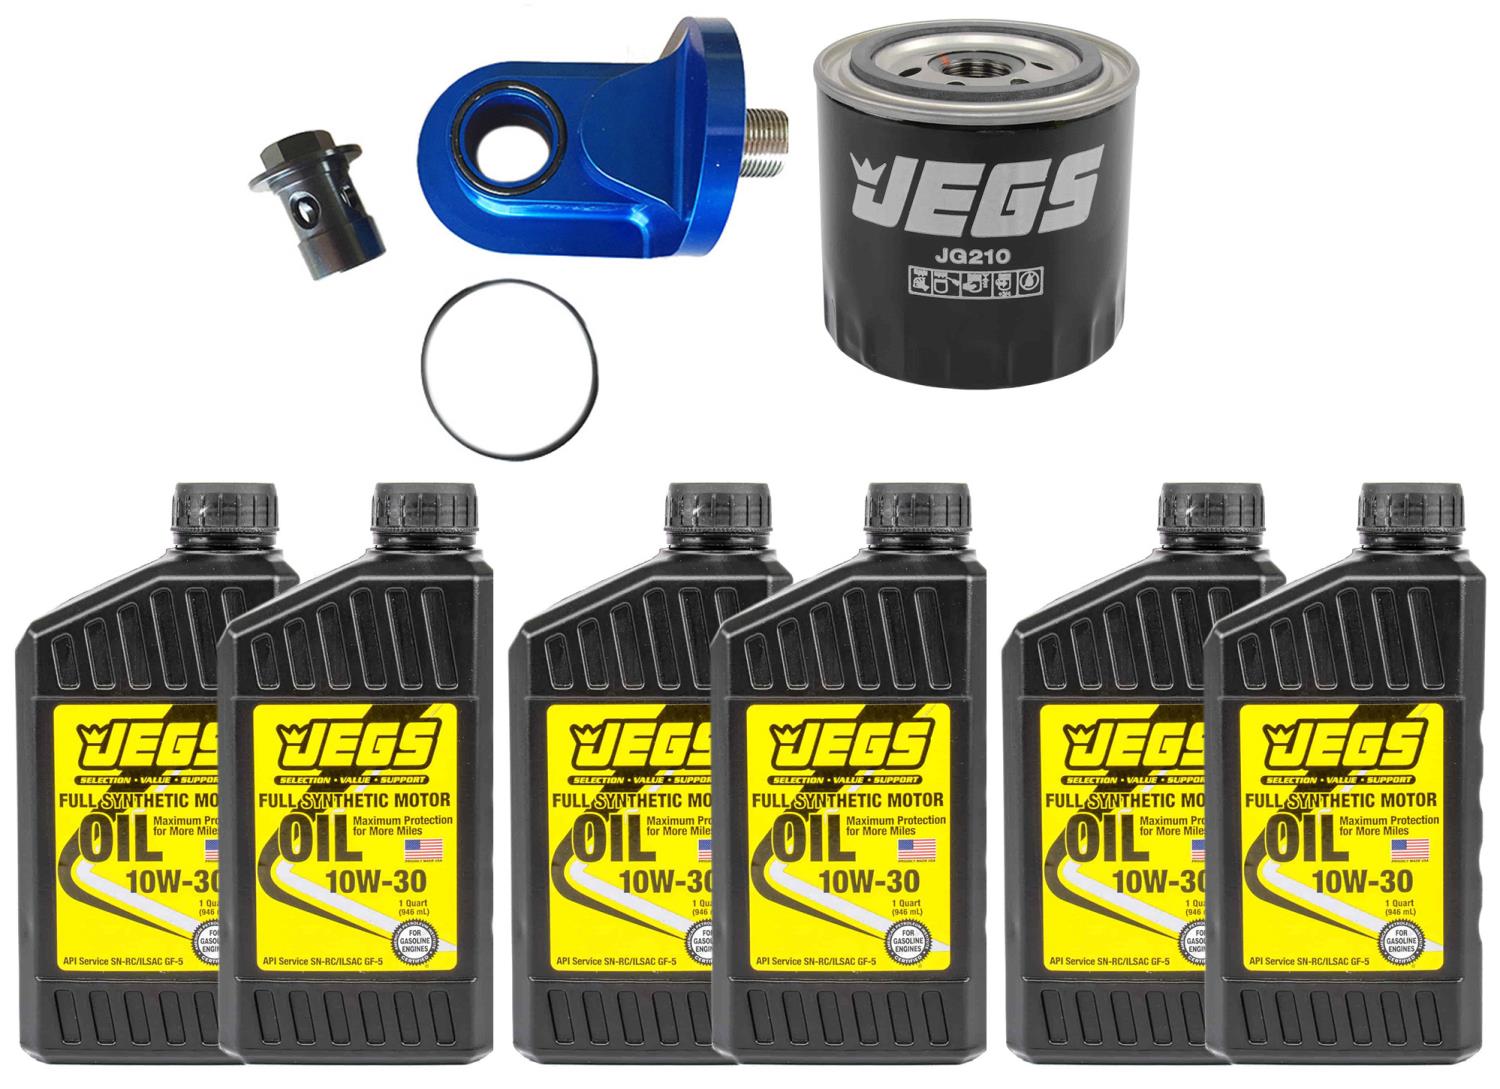 90-Degree Oil Filter Adapter, Oil Filter, and 10W30